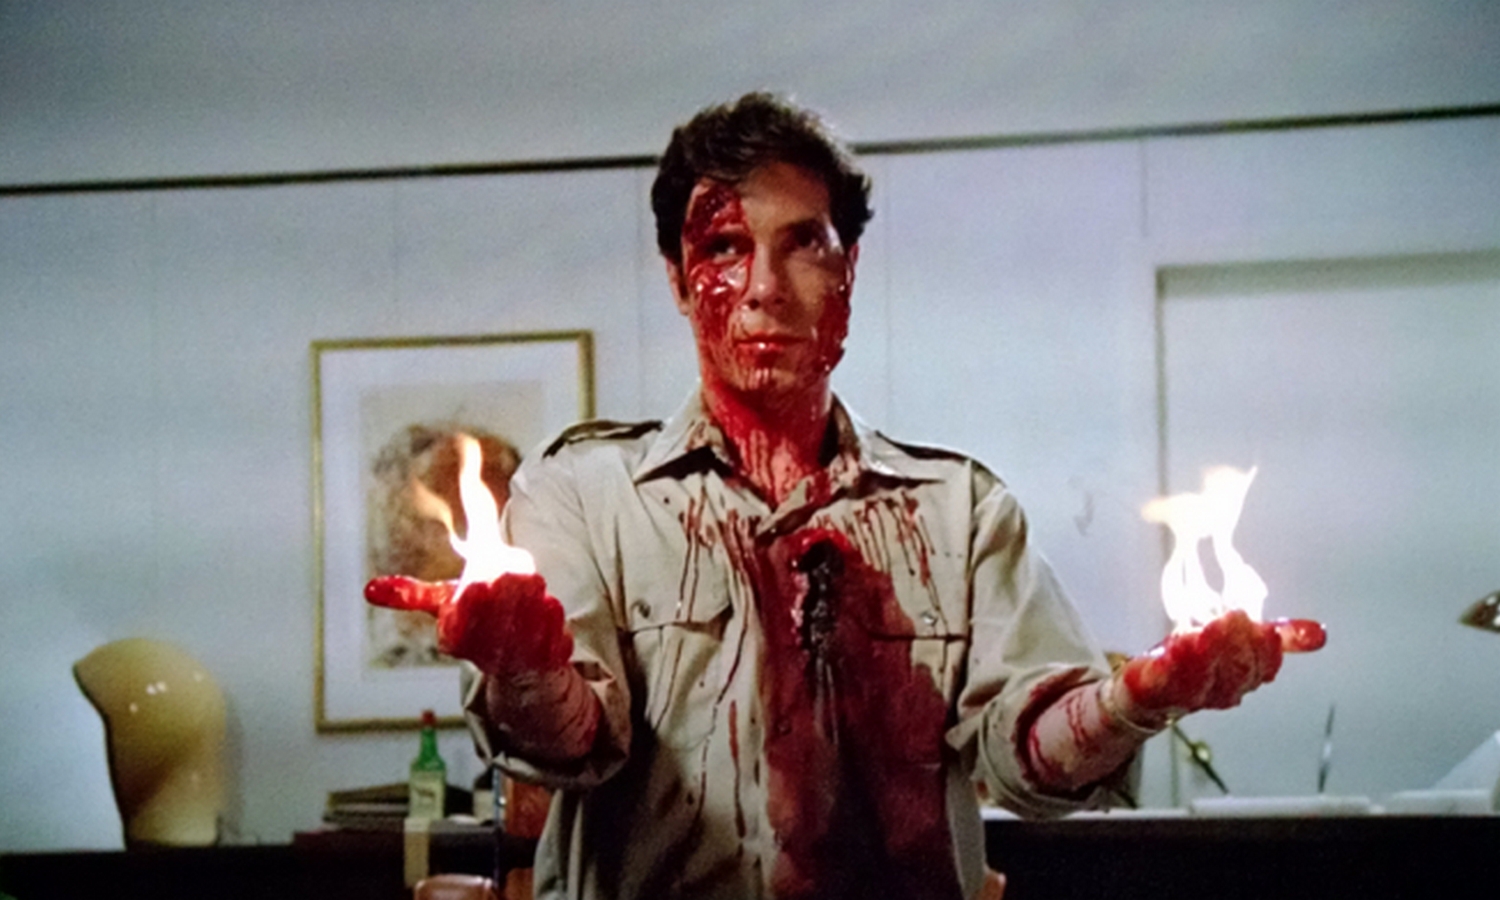 Scanners: The Sci-Fi Horror Movie That Changed David Cronenberg's